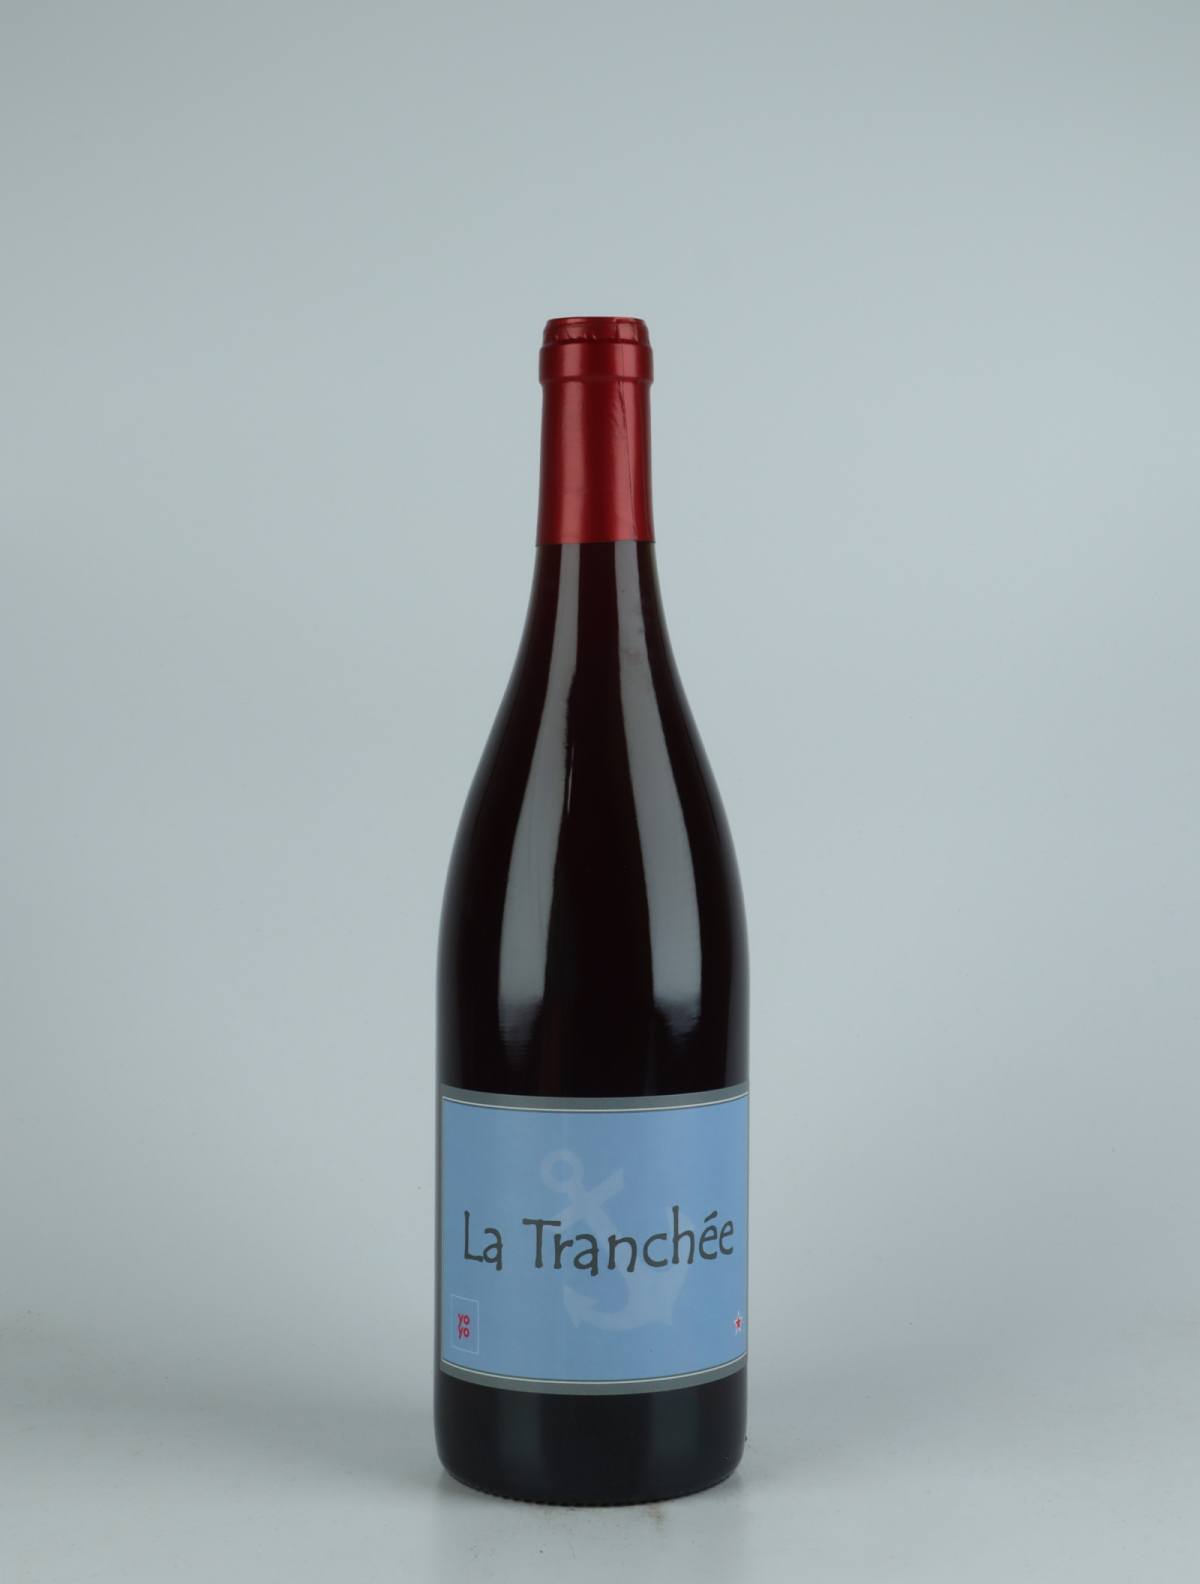 A bottle 2021 La Tranchée Red wine from , Rousillon in France